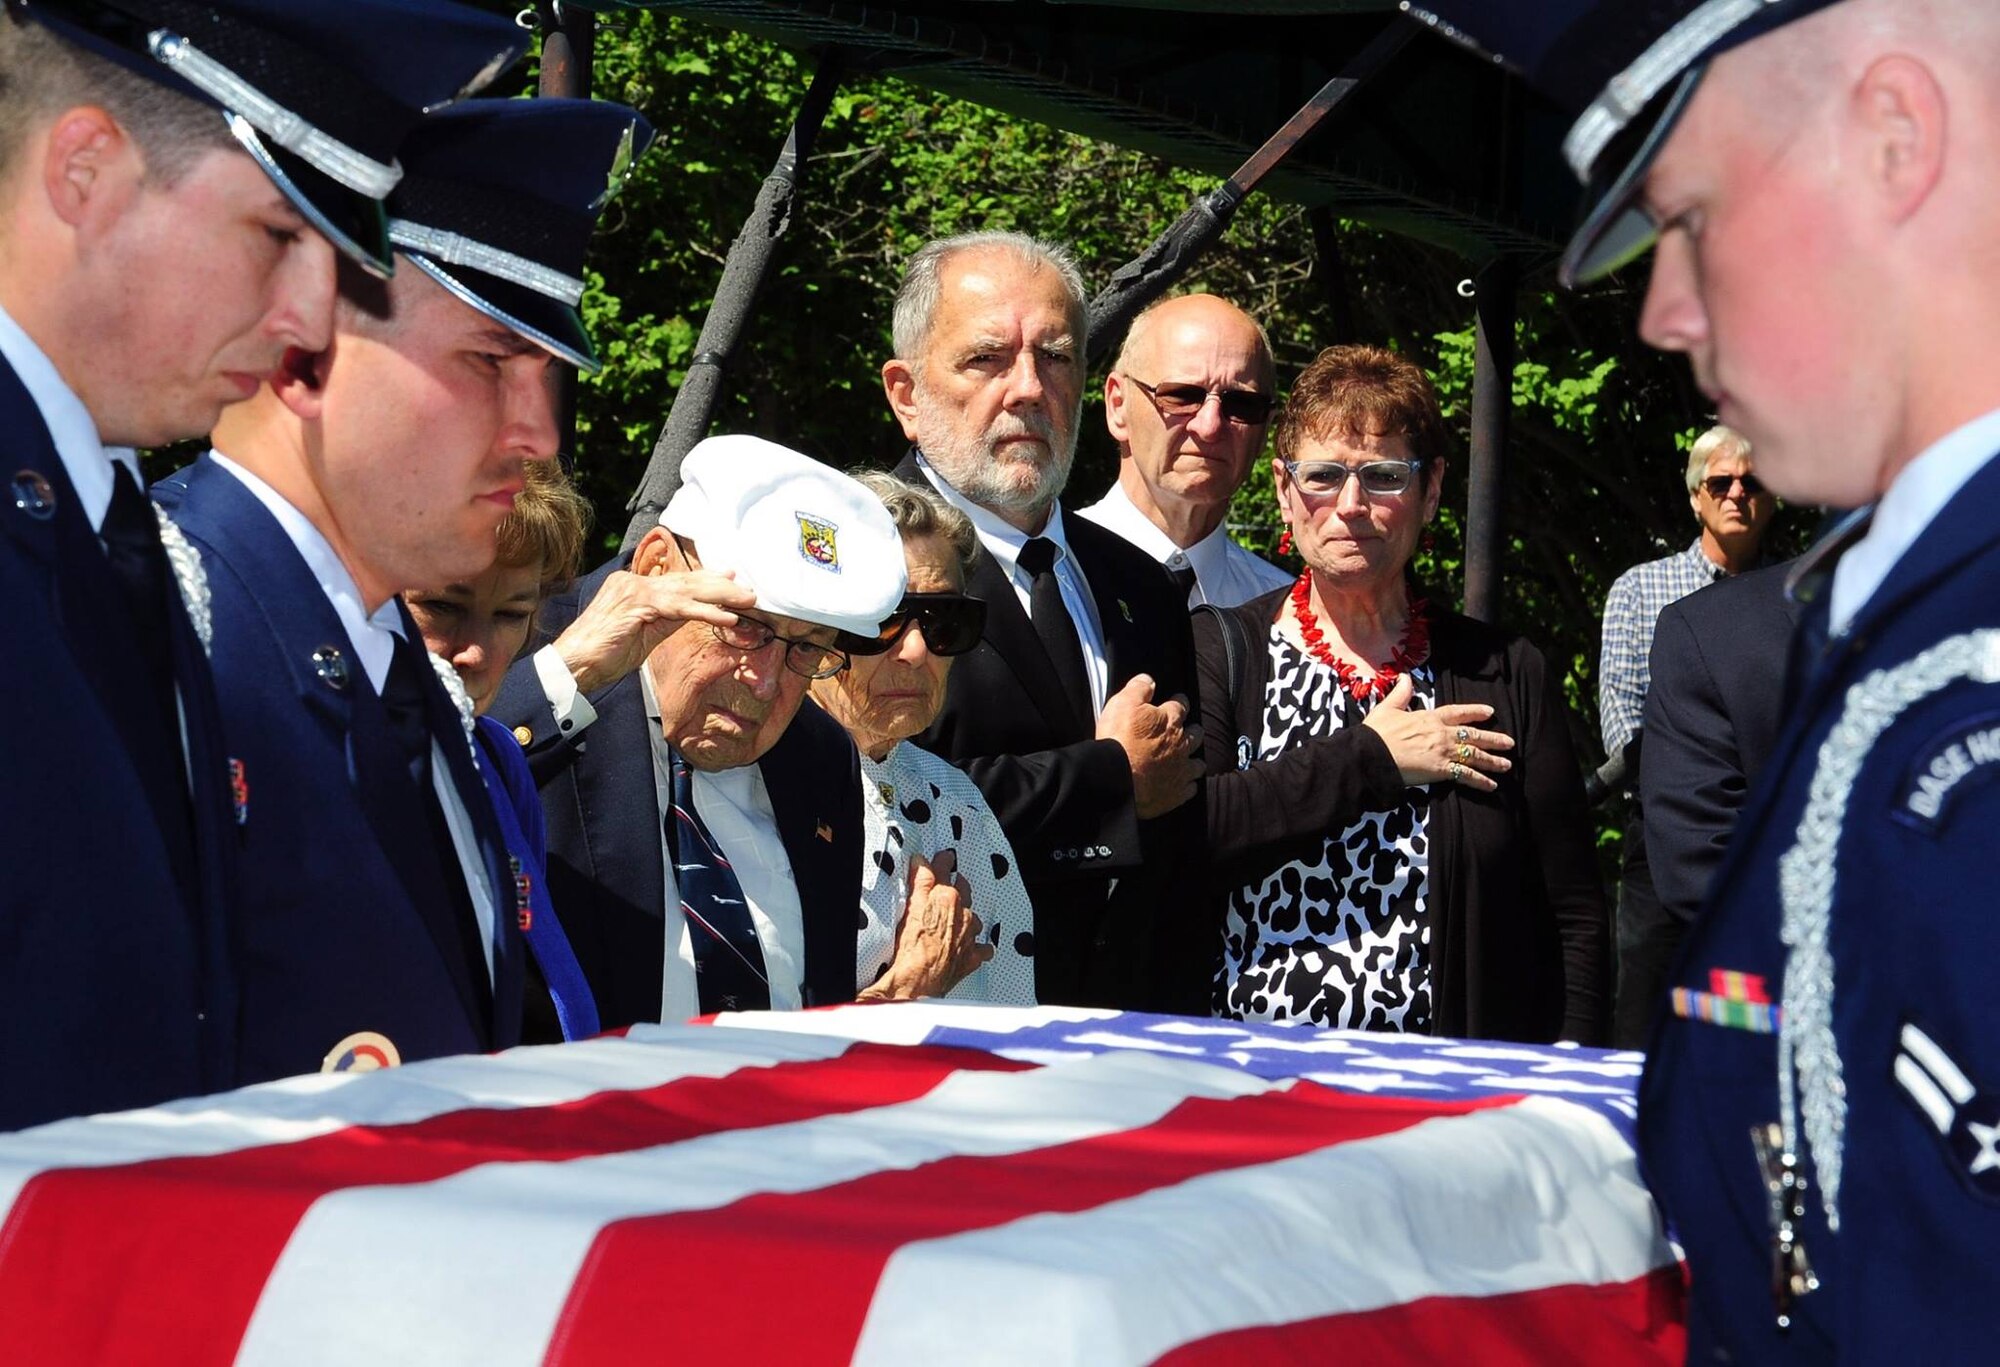 Retired Lt. Col. Richard Cole, the last surviving Doolittle Raider, center, salutes as members of the Malmstrom Air Force Base Honor Guard render military honors during a funeral service in honor of Staff Sgt. David J. Thatcher June 27, 2016, in Missoula, Mont. Thatcher was the second to last remaining Doolittle Raider and is a recipient of the Congressional Gold Medal and Air Force Silver Star. His other decorations include the Distinguished Flying Cross, Air Medal with four oak leaf clusters, and the Chinese Army, Navy and Air Corps Medal. (U.S. Air Force photo by 2nd Lt. Annabel Monroe)